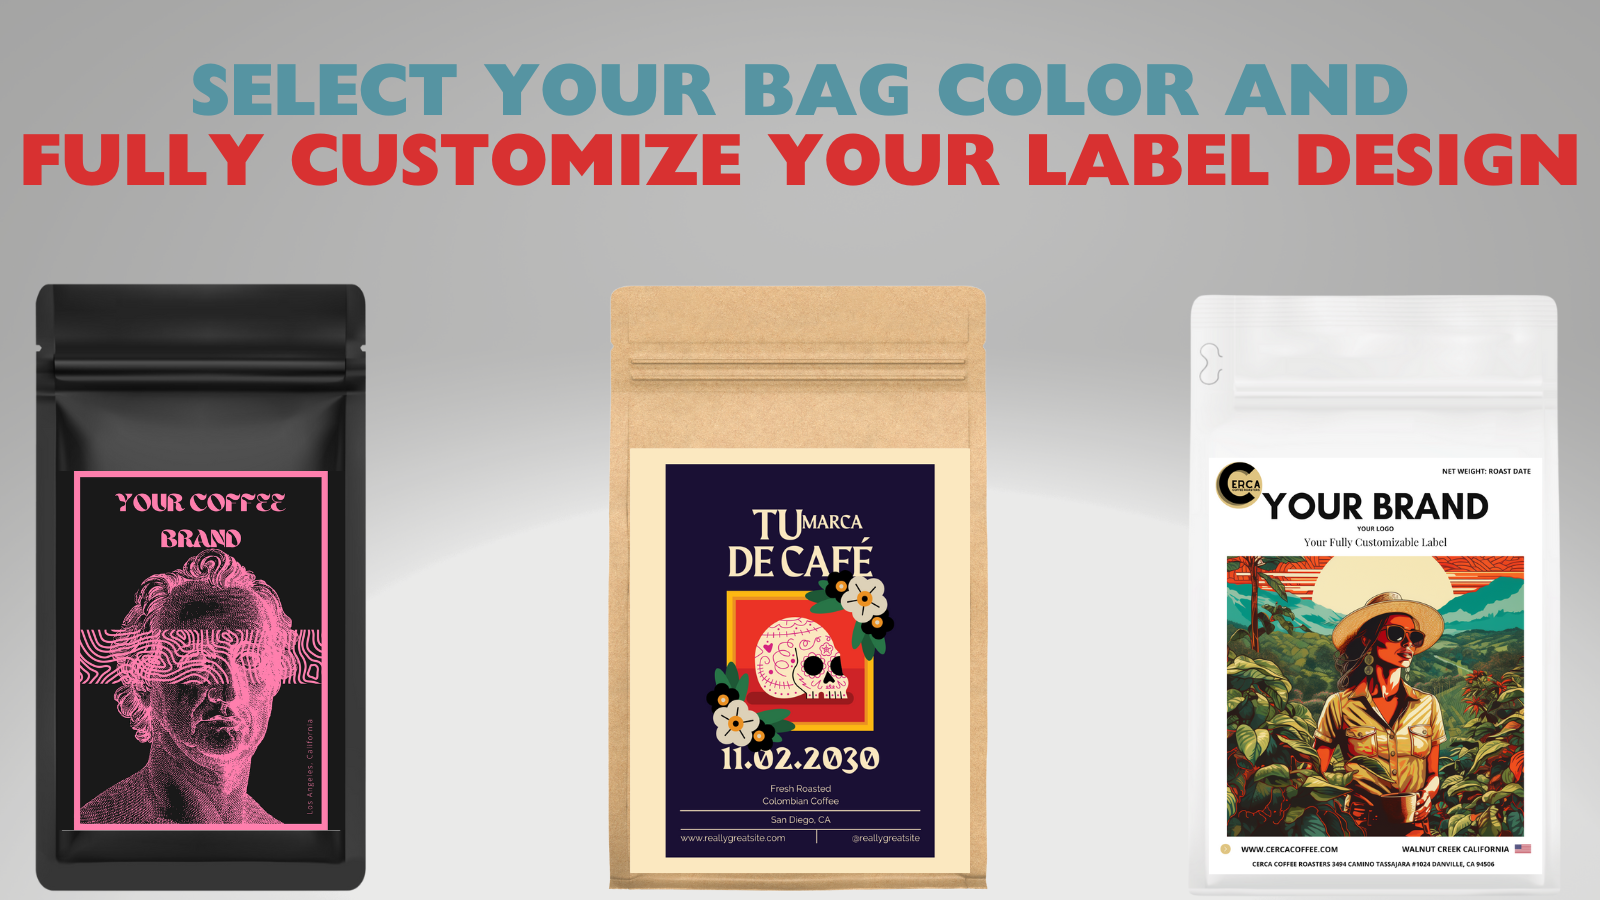 Select your bag color and fully customize your label design.